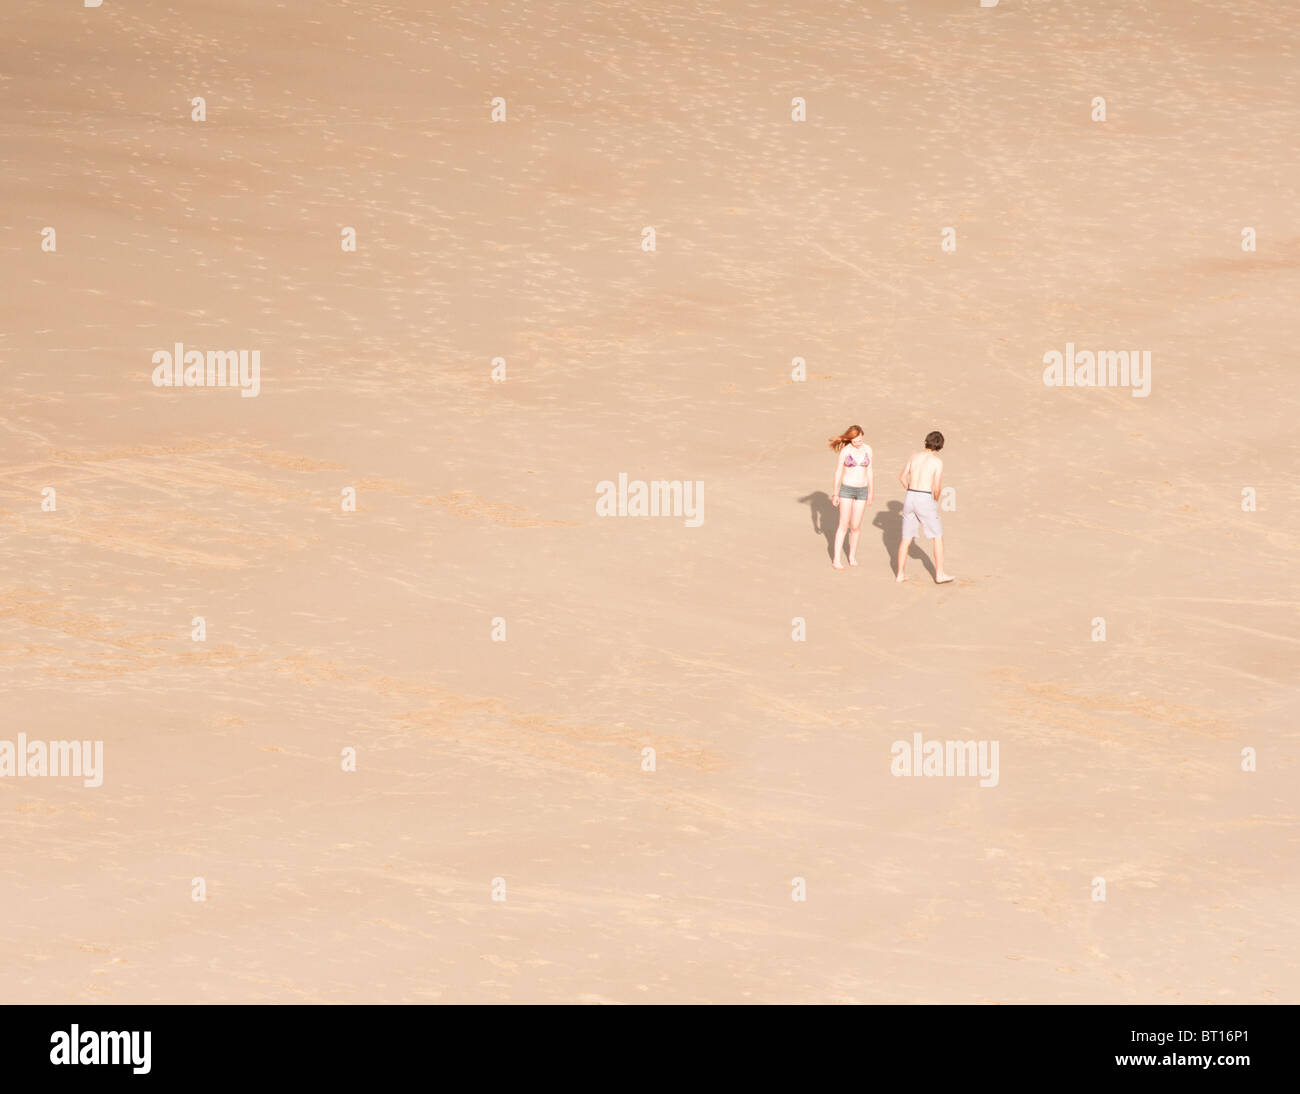 A young couple on a sandy beach in Tynemouth, UK Stock Photo